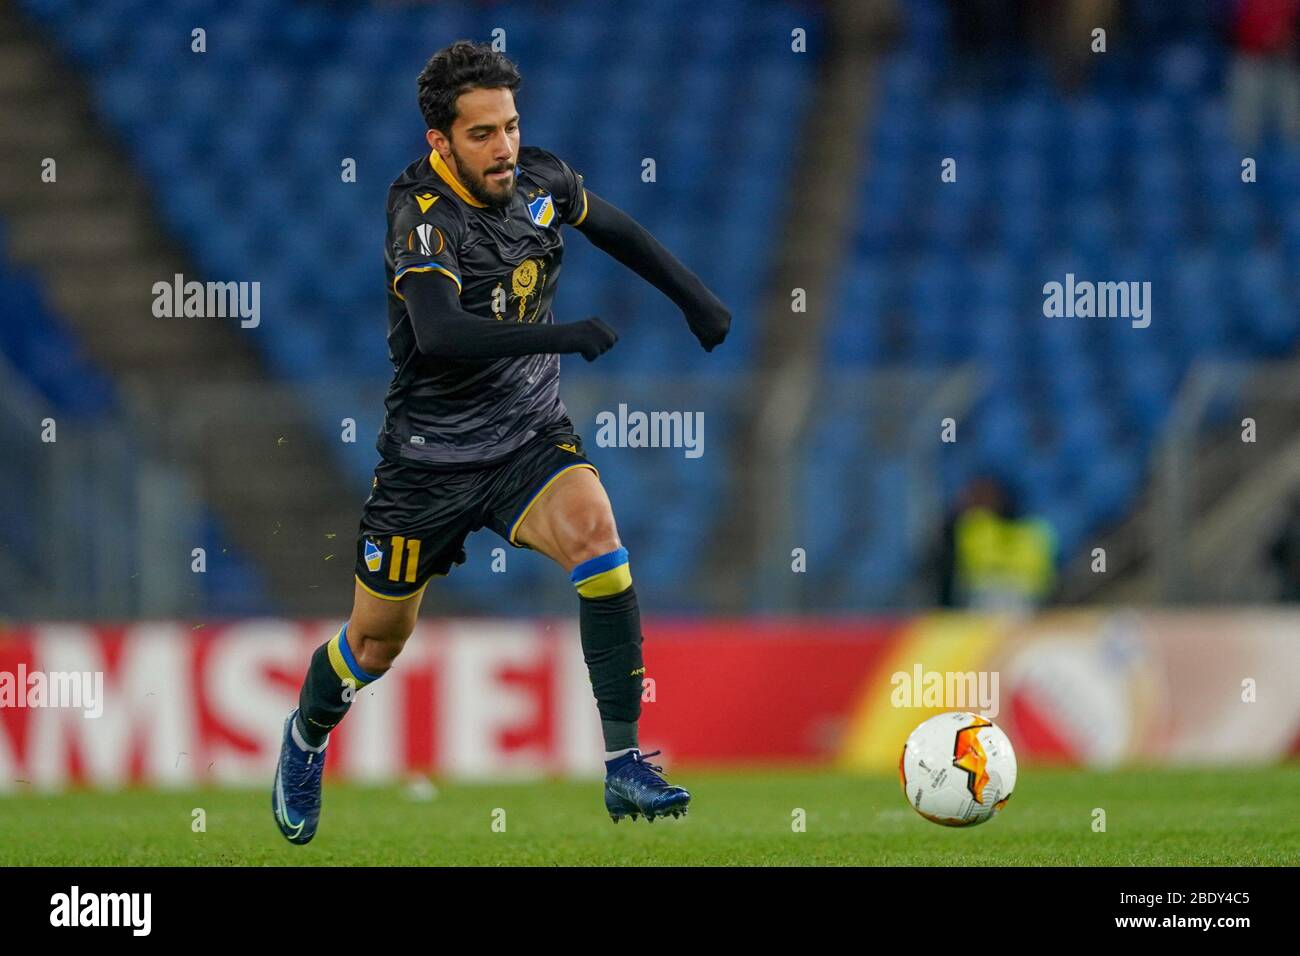 BASEL. SWITZERLAND. FEB 27: Moussa Al Tamari (Apoel) in action during the  Europa League game between FC Basel 1893 and Apoel FC at St. Jakob Park in  Basel, Switzerland. (Photo by Daniela